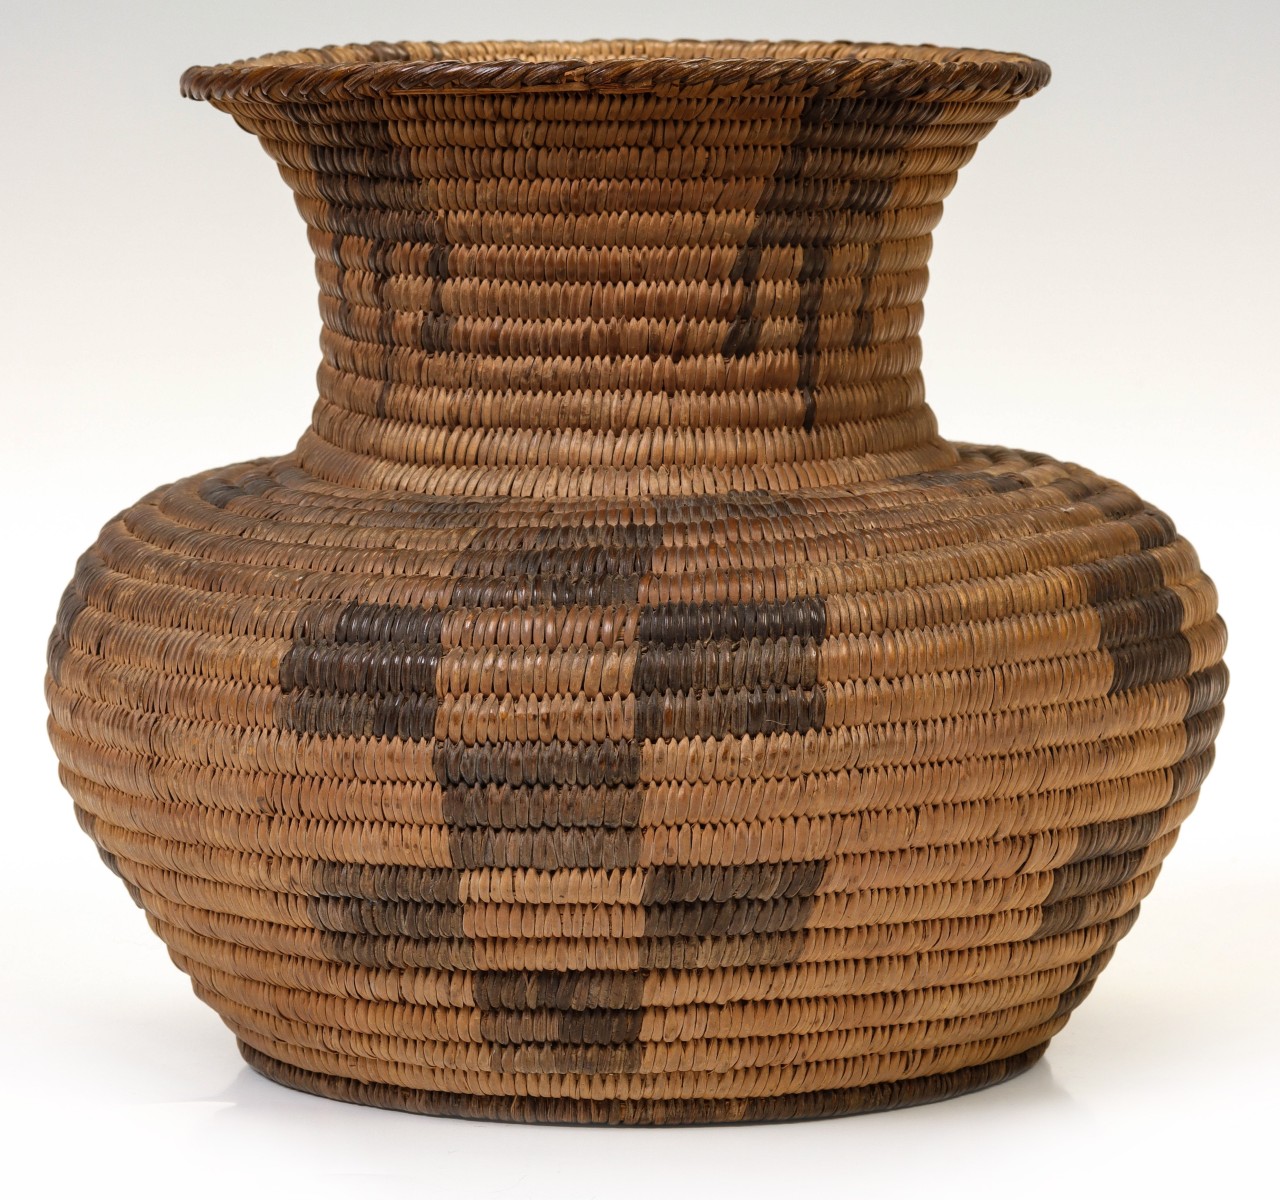 A PIMA BASKETRY OLLA WITH CHECKERBOARD AND BEAR CLAWS